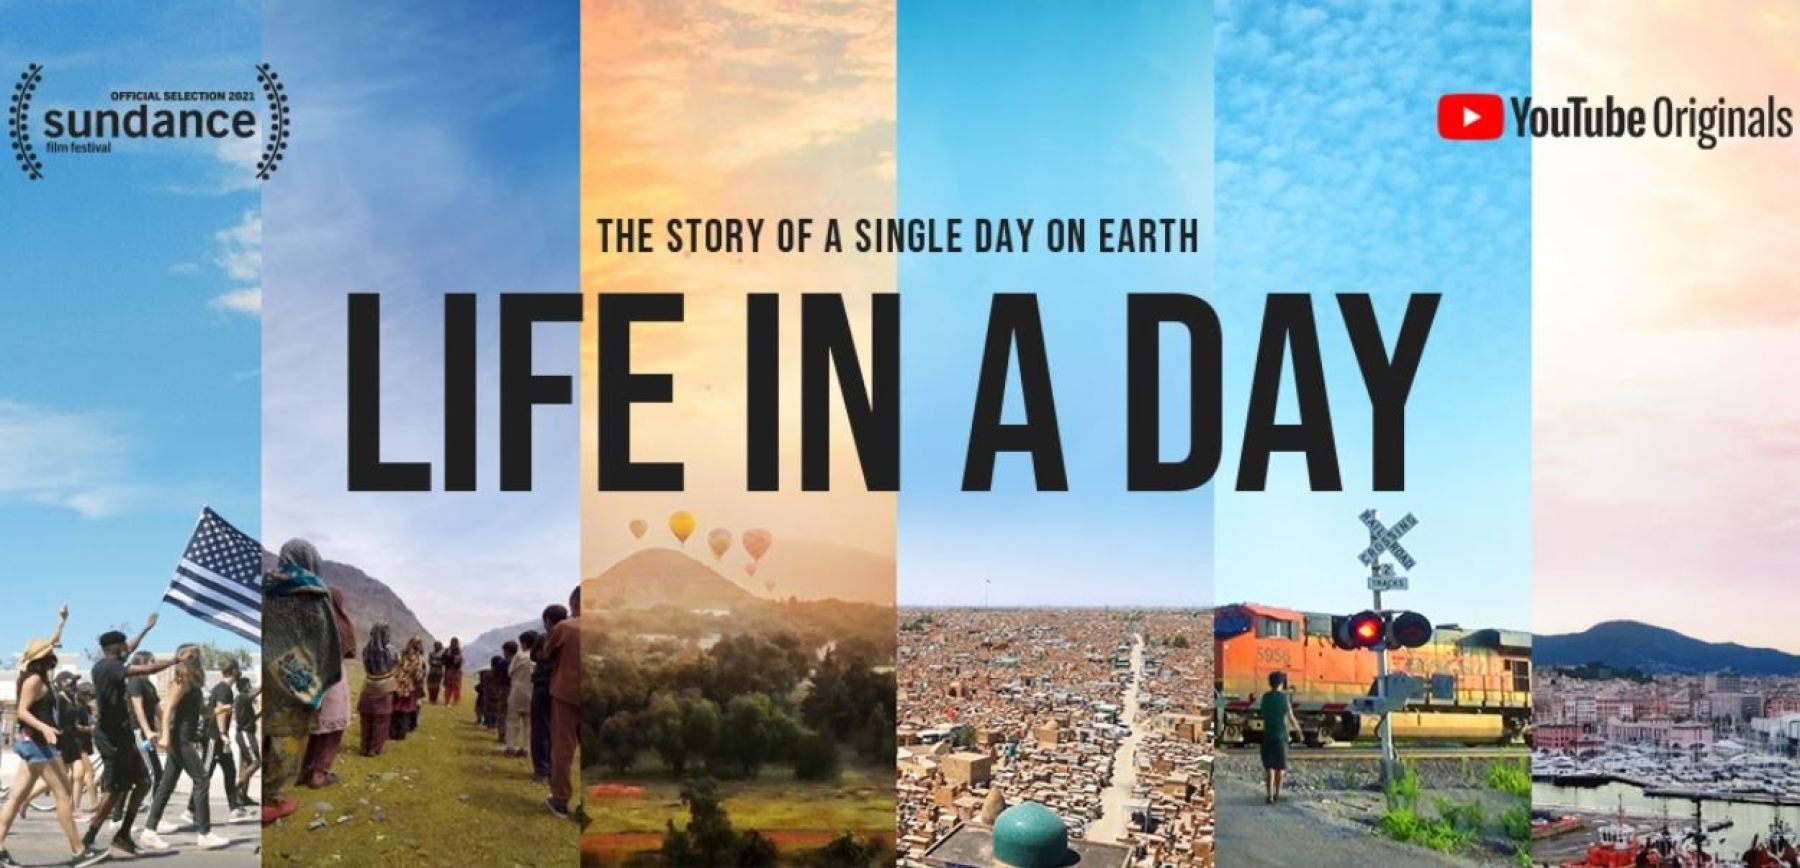 Life in a day 2020 YouTube